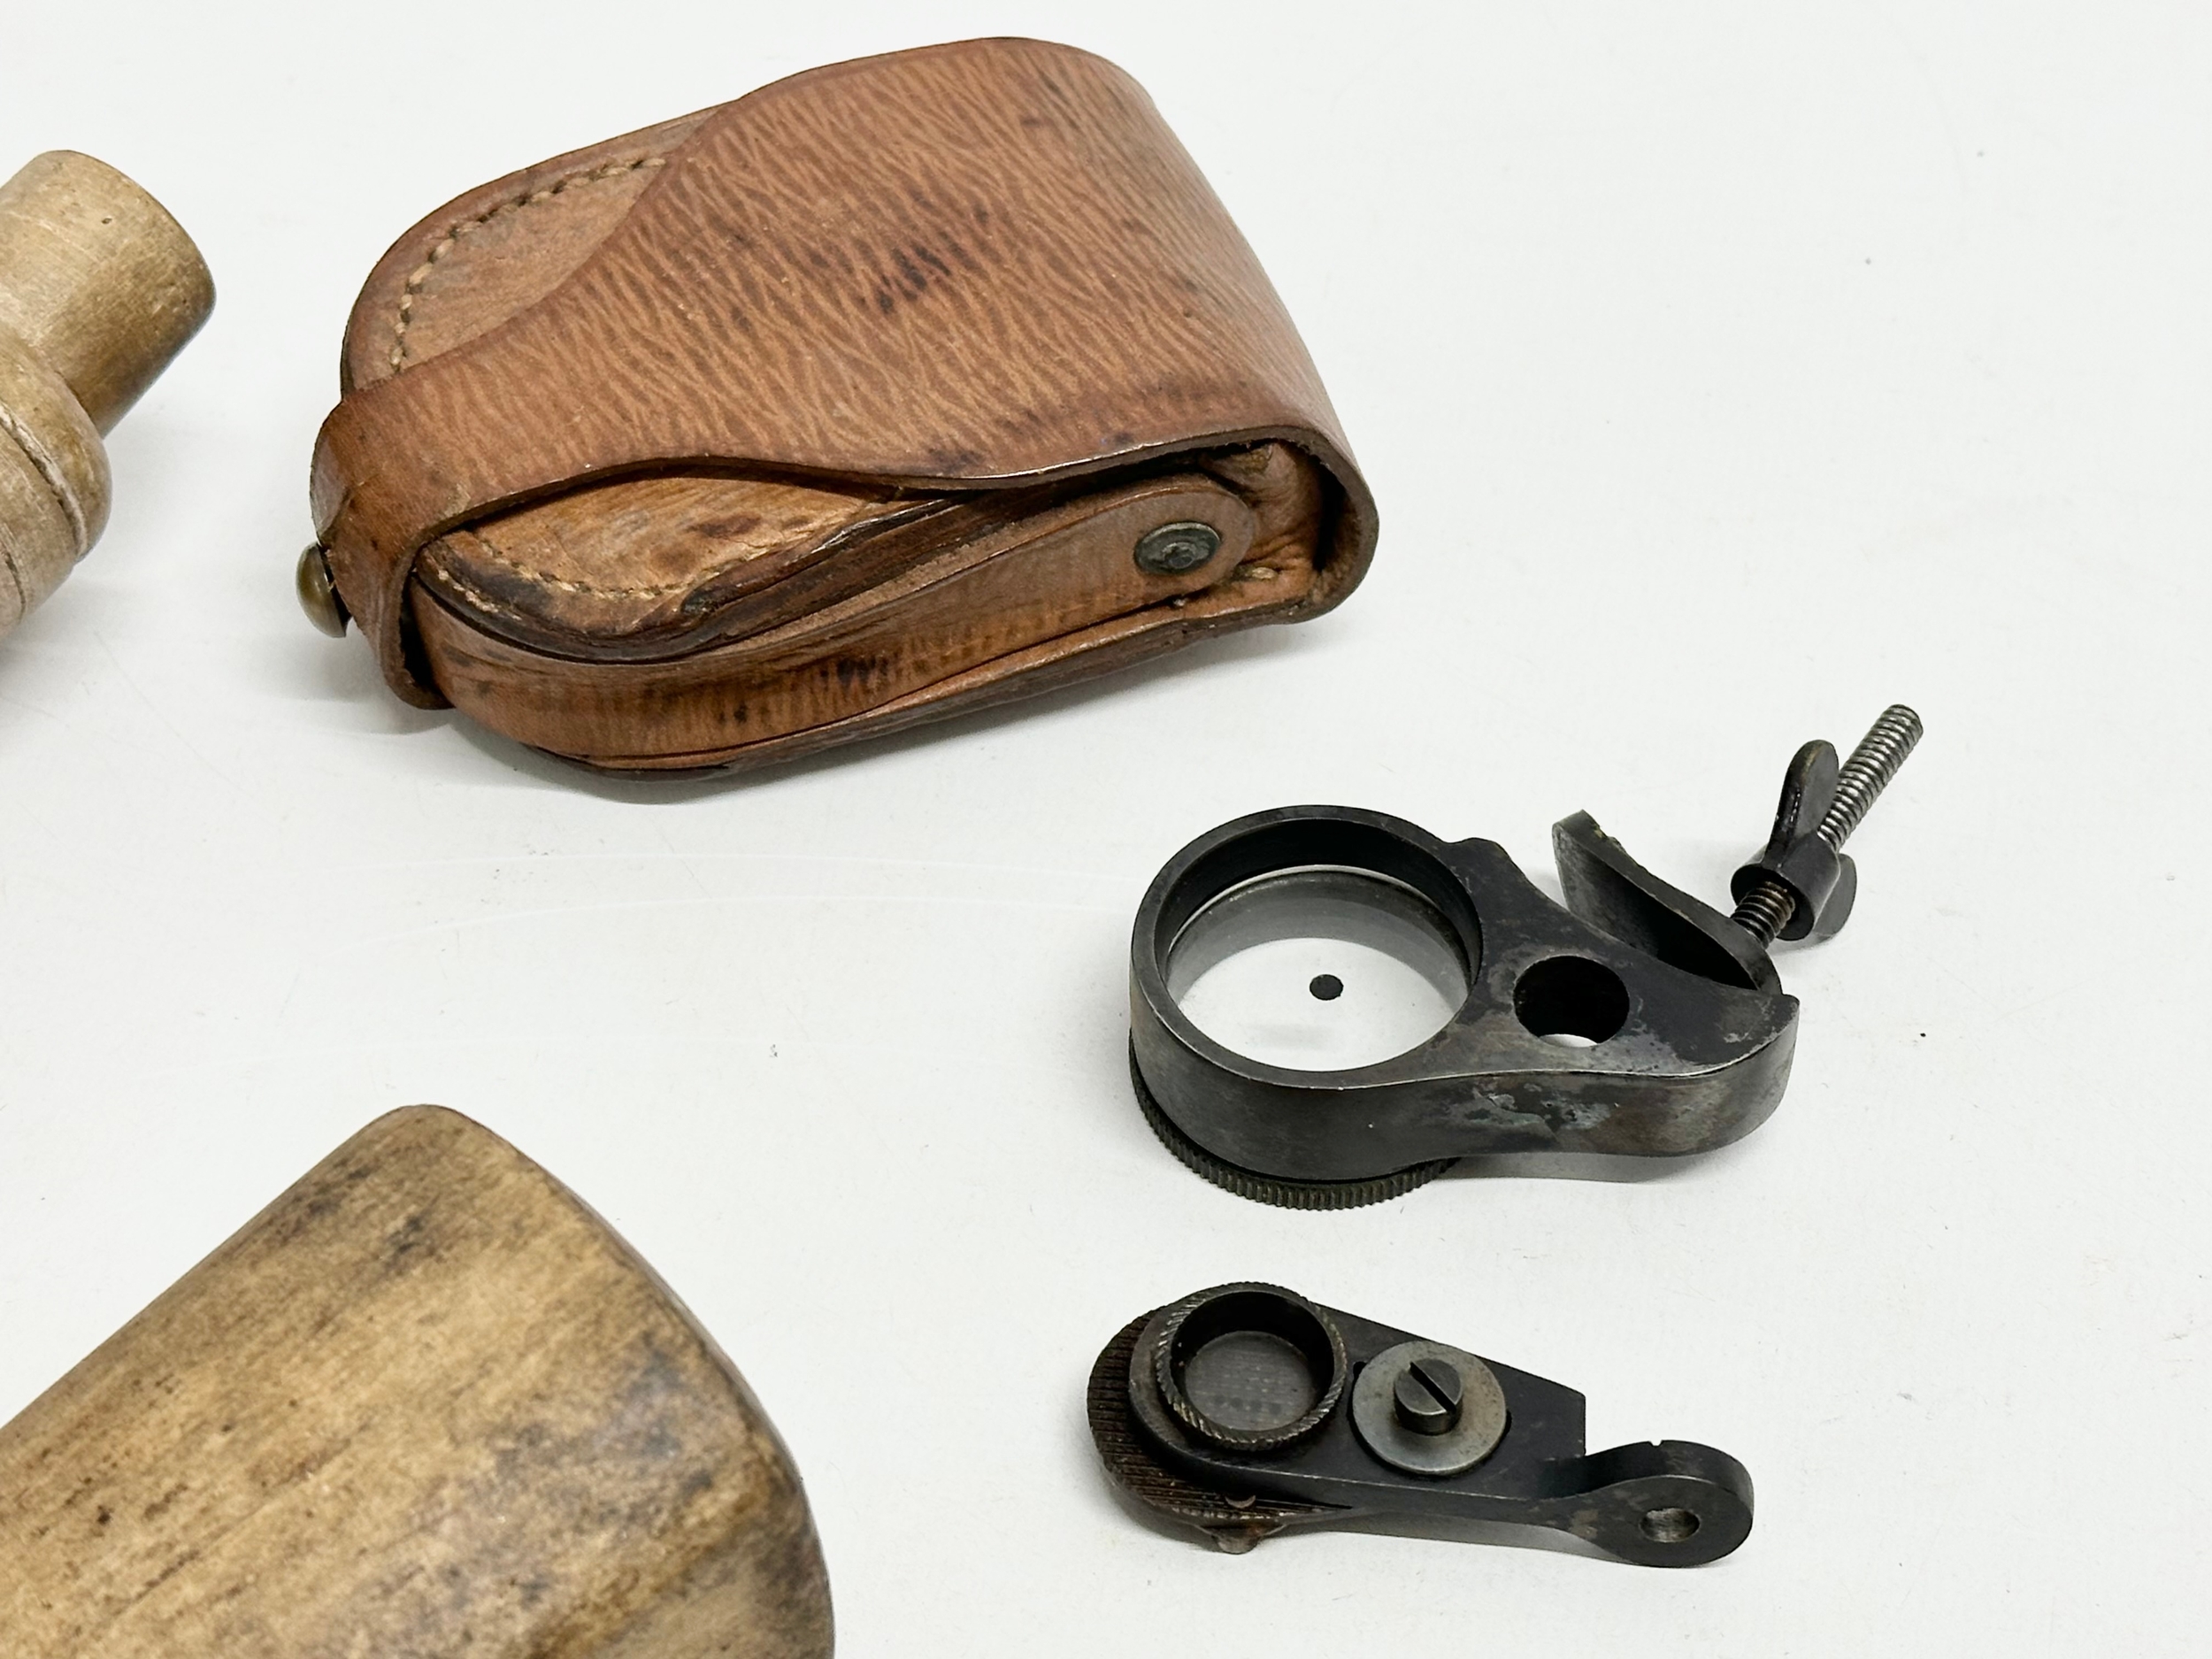 A job lot. 3 late 19th century wooden tools, barometer, scope with case etc. - Image 3 of 5